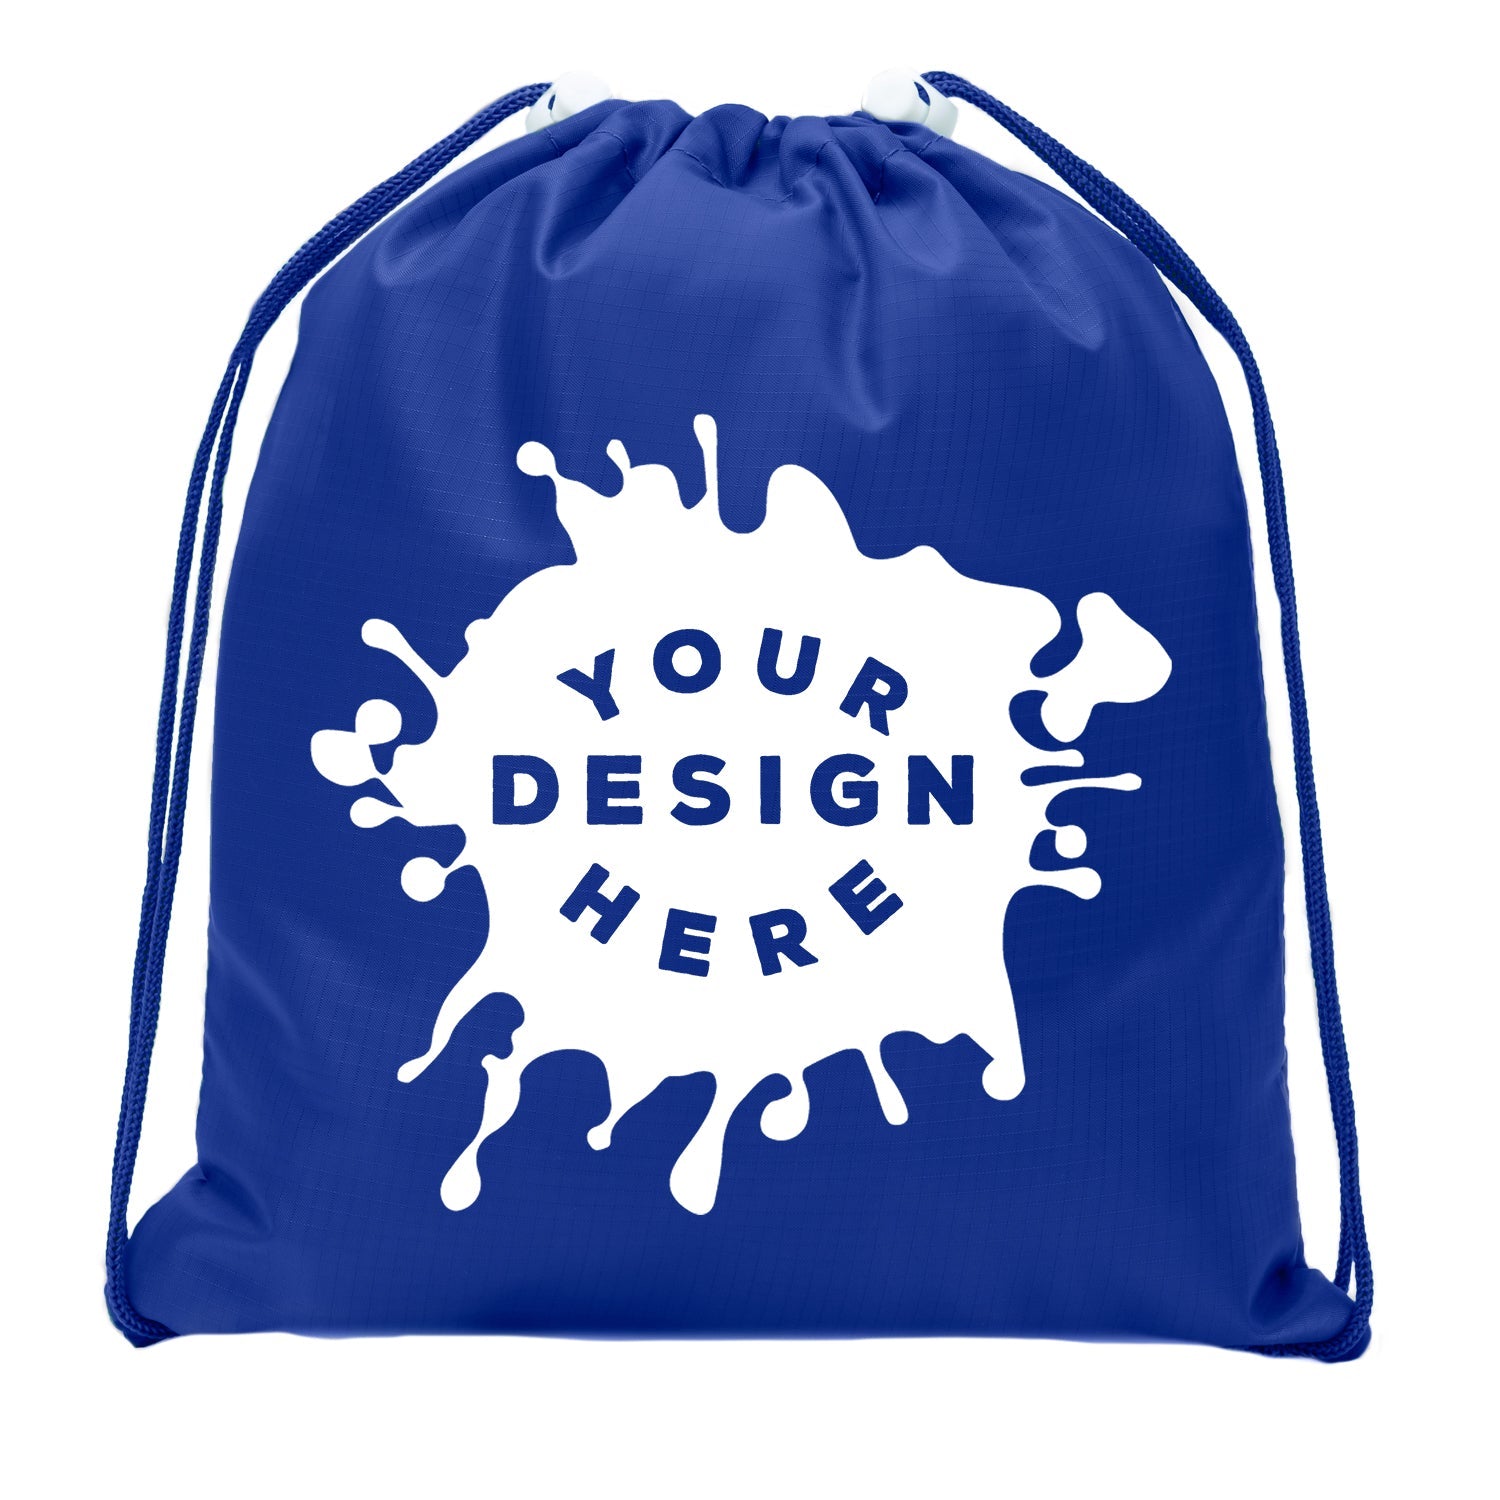 Water Resistant Drawstring  Cinch Bags  Personalized by Team Towels